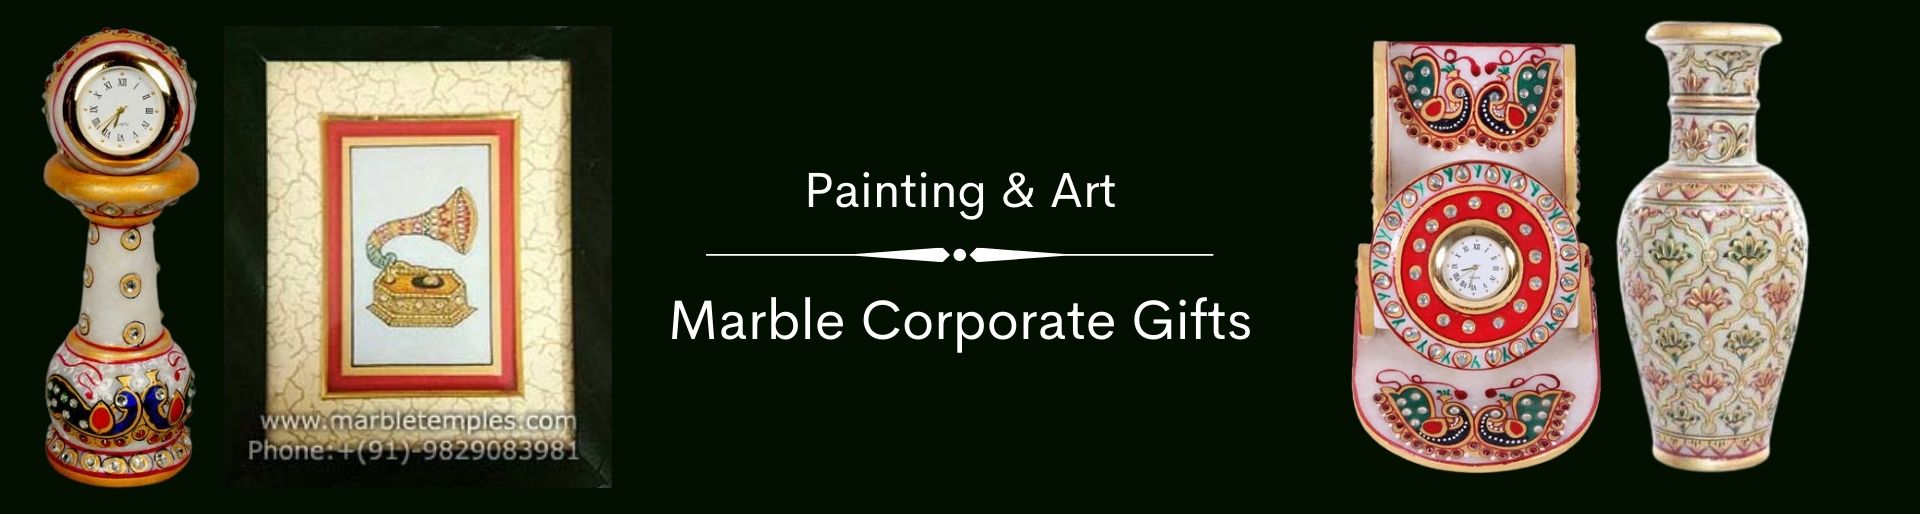 marble-corporate-gifts